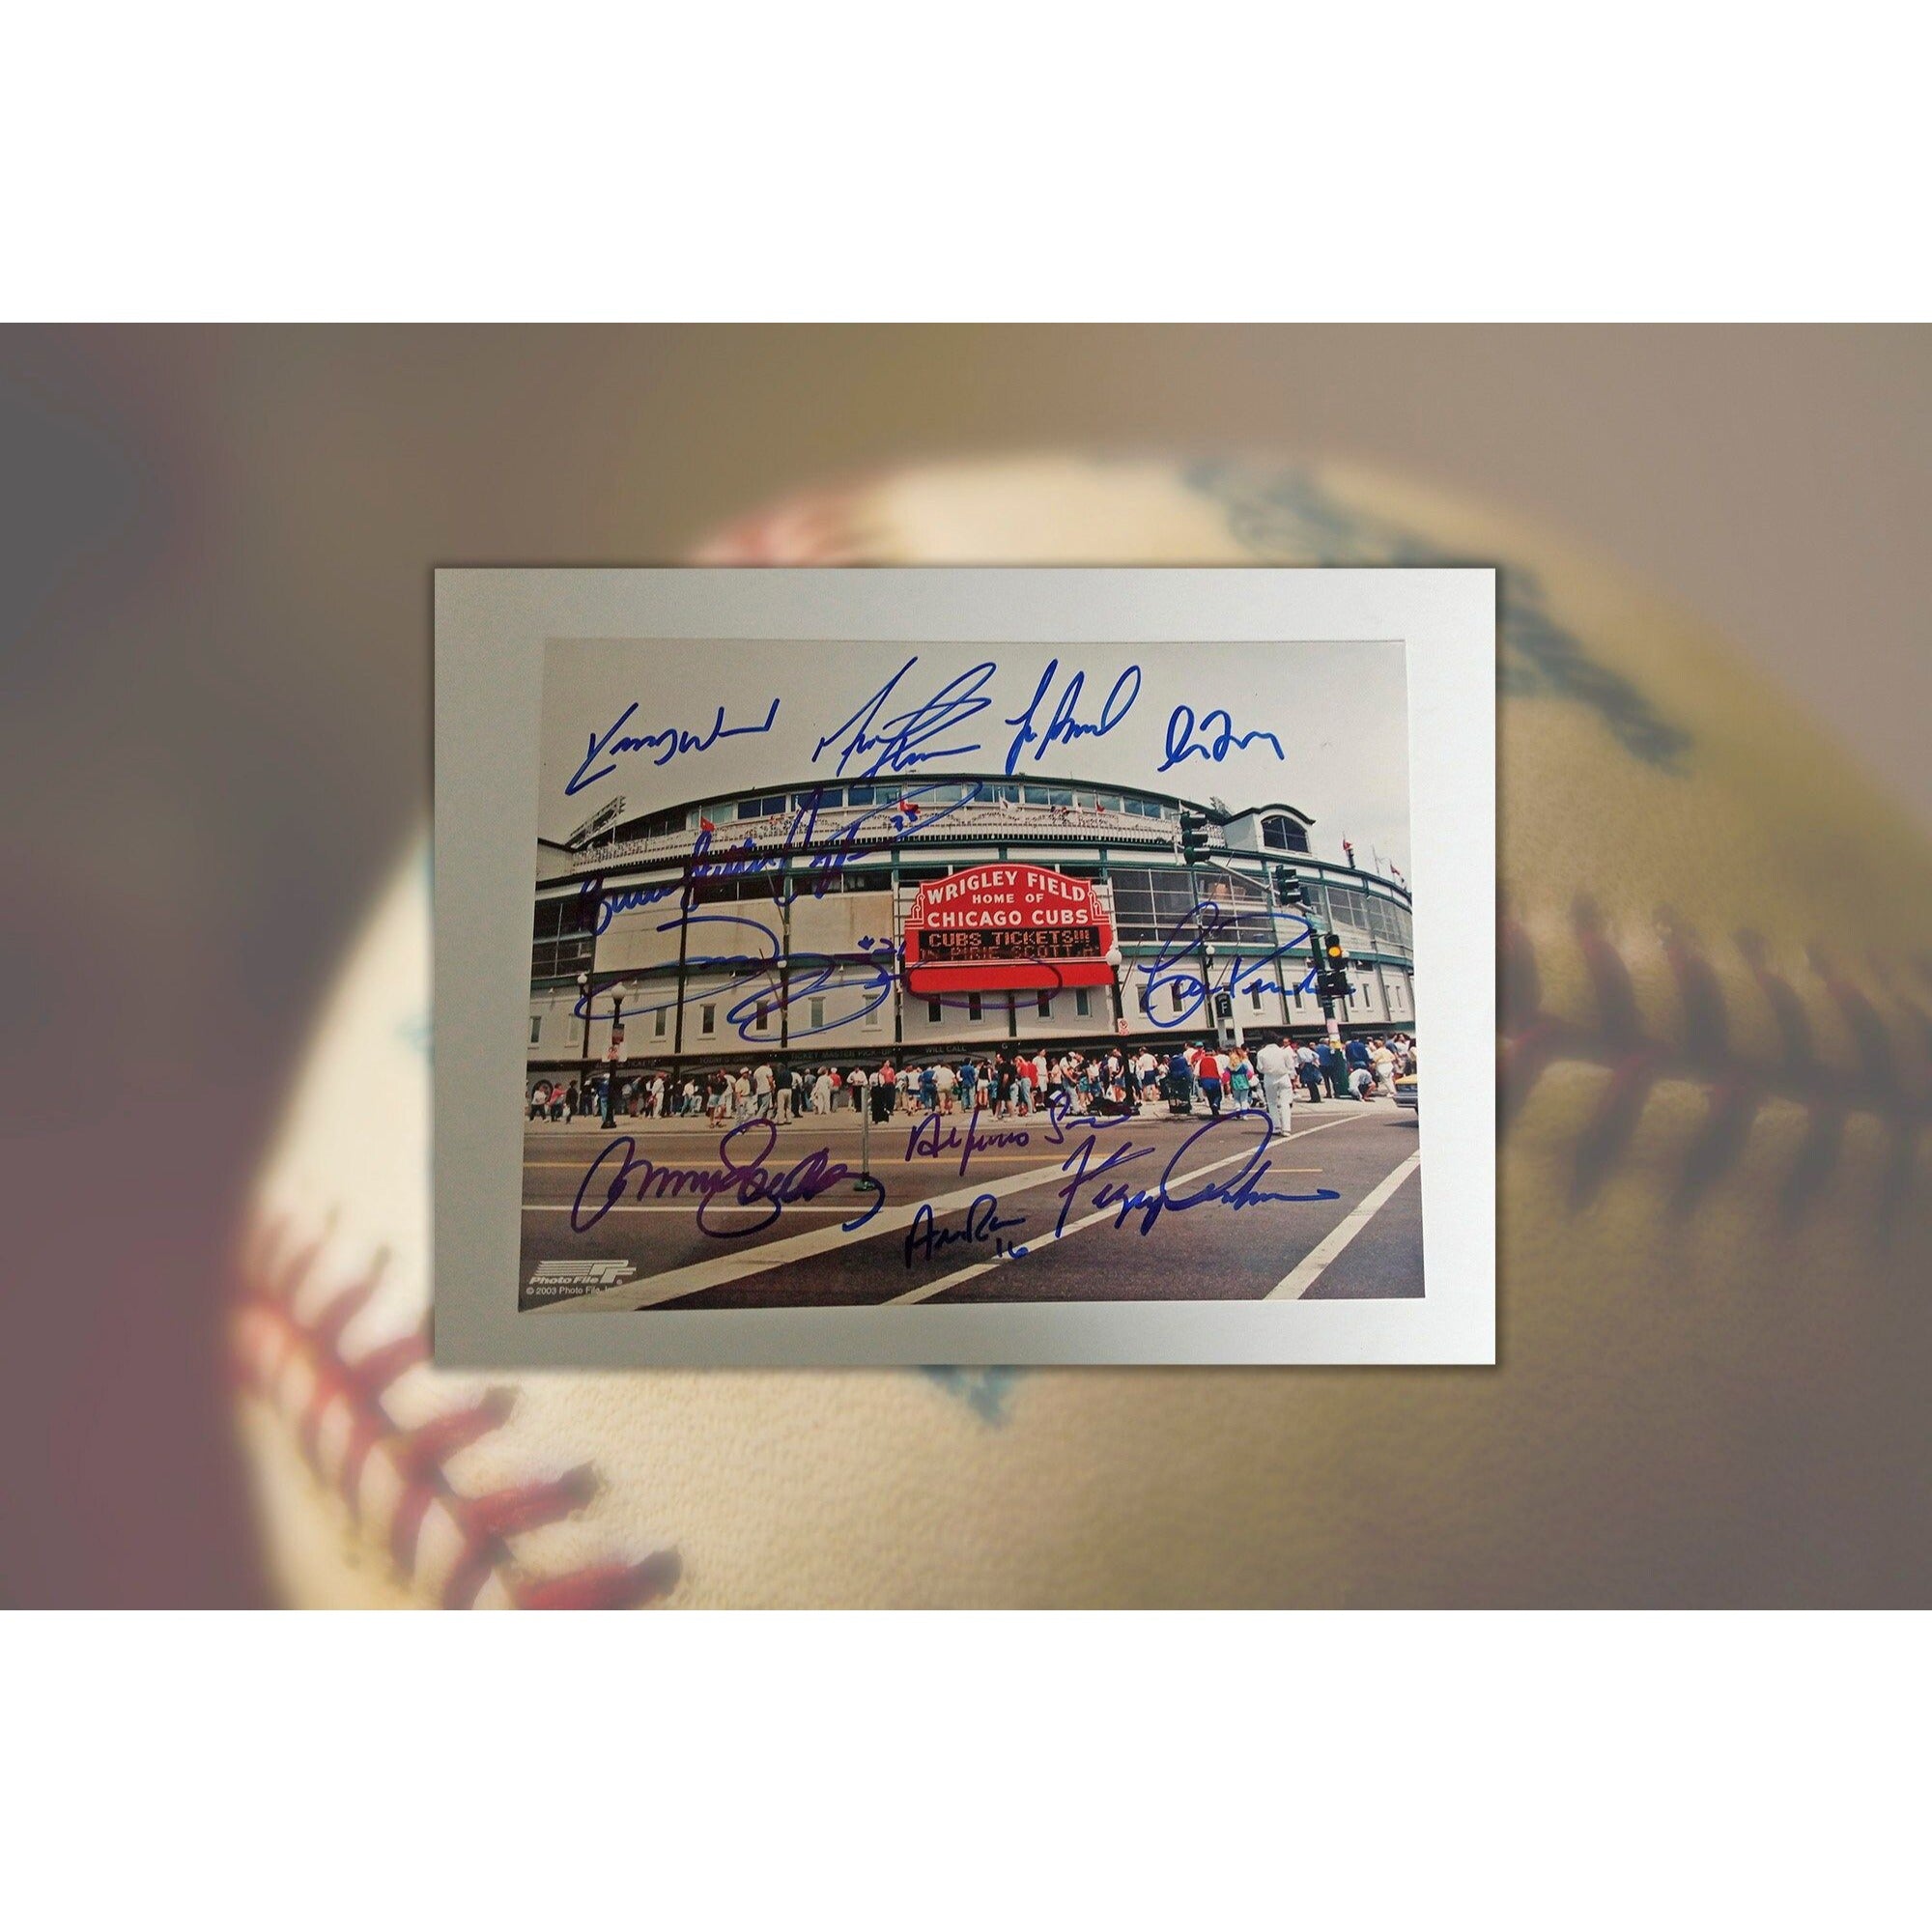 Ryne Sandberg, Bruce Sooter, Greg Maddux Chicago Cubs signed 8 by 10 photo signed with proof